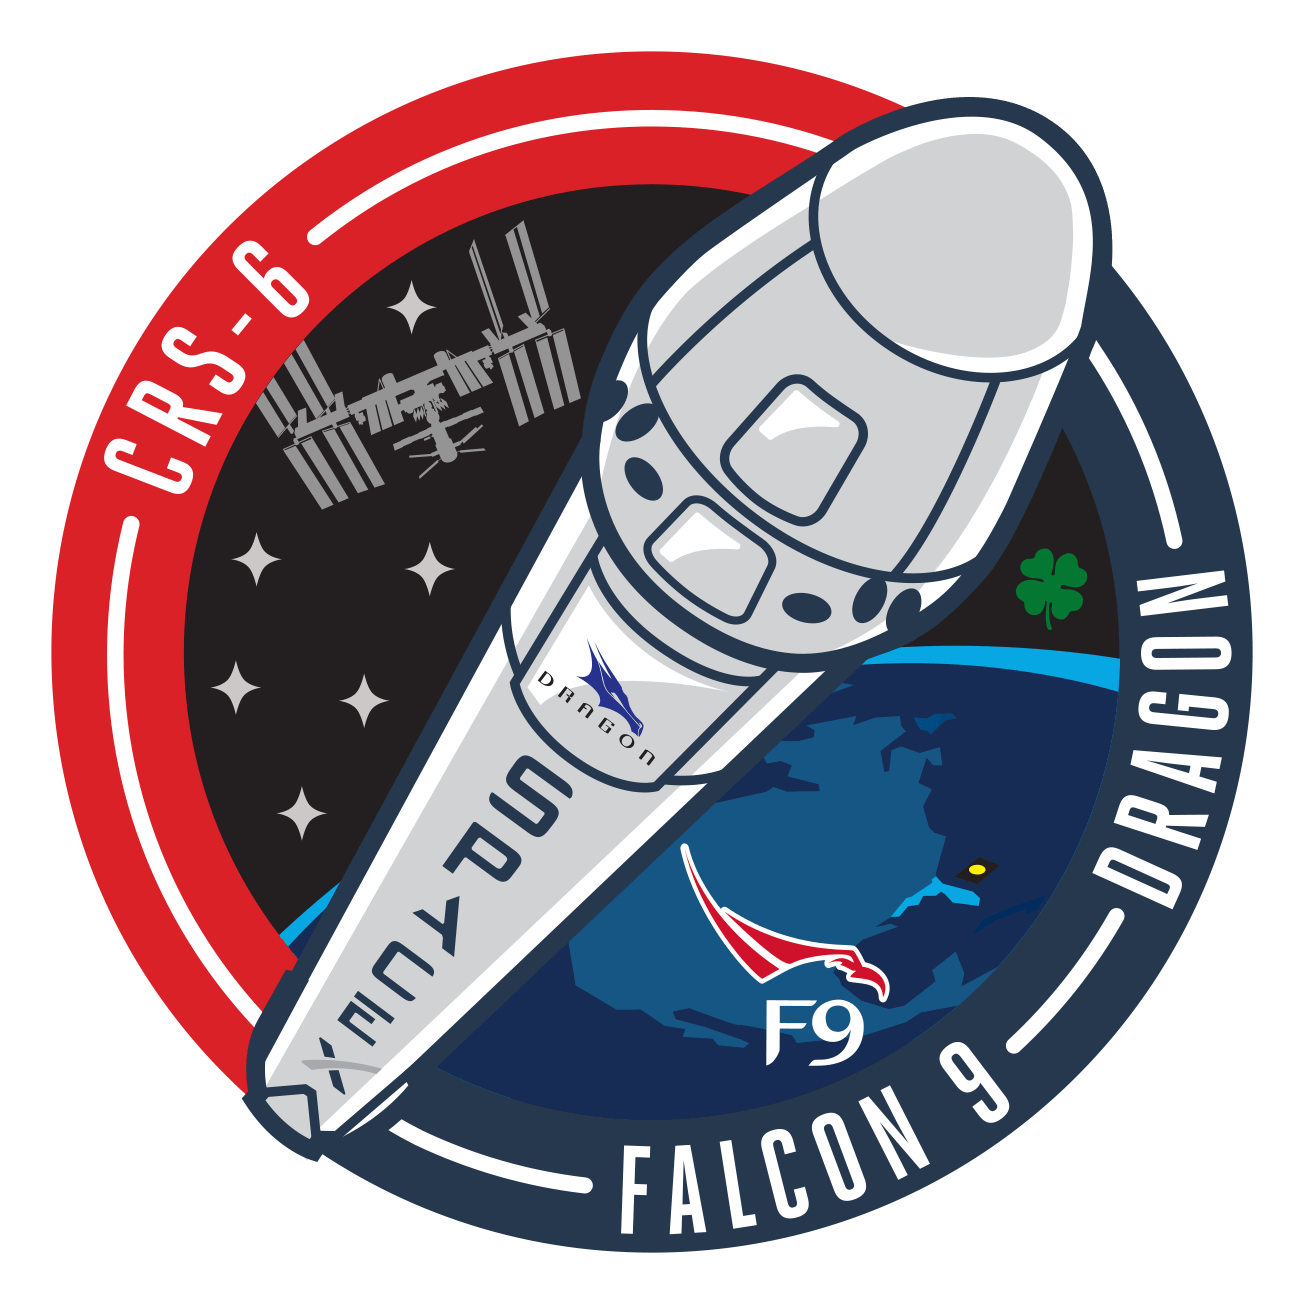 10 Mission SpaceX Logo - Information about Mission Patch Spacex Crs 1 - r18worker.info